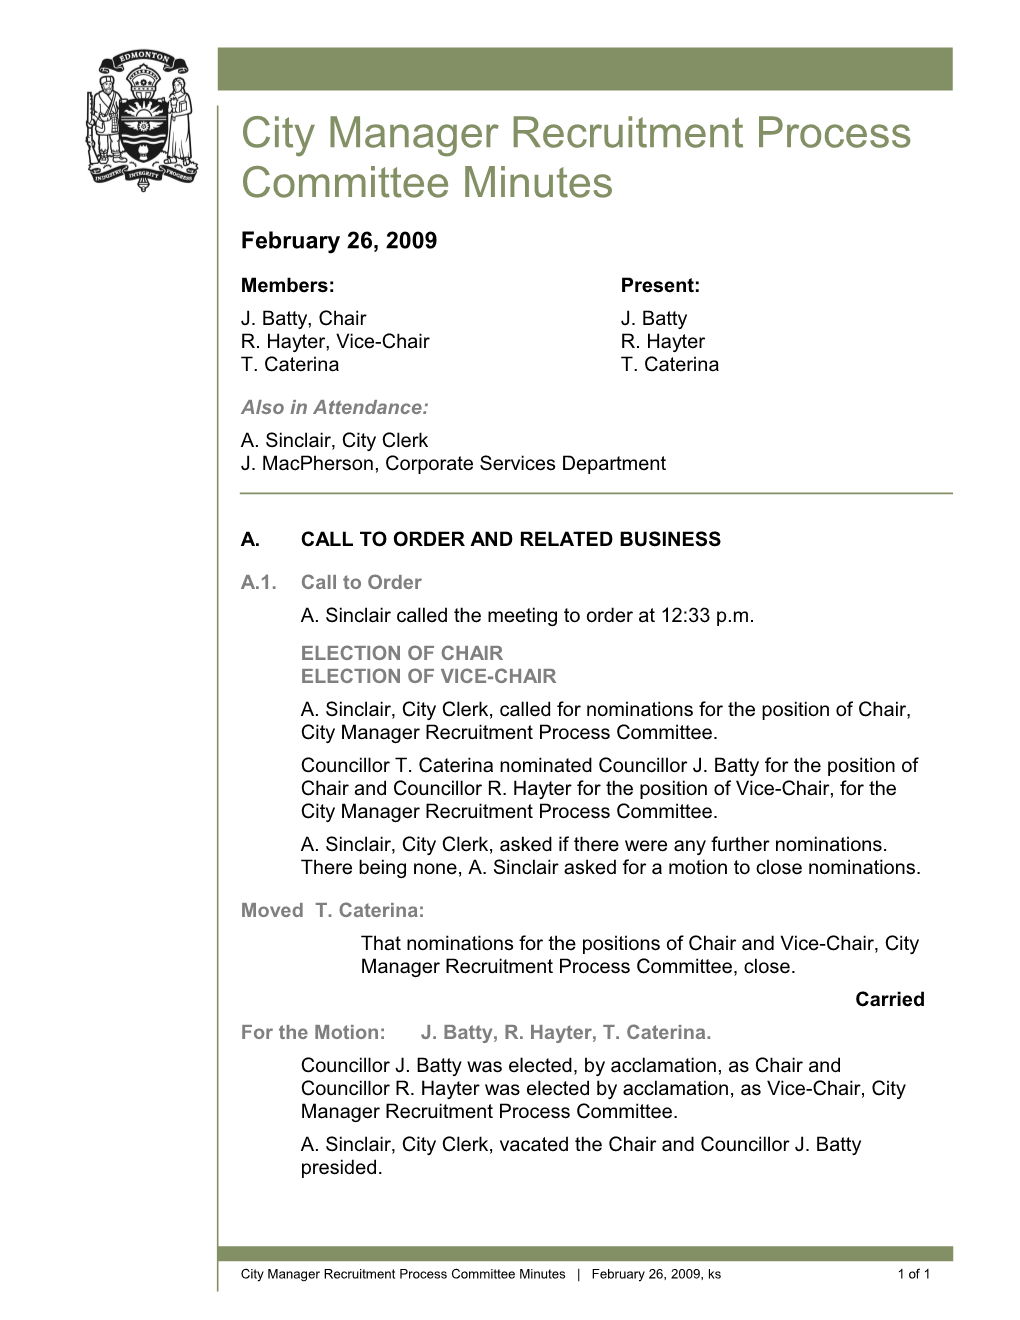 Minutes for Performance Evaluation Committee February 26, 2009 Meeting